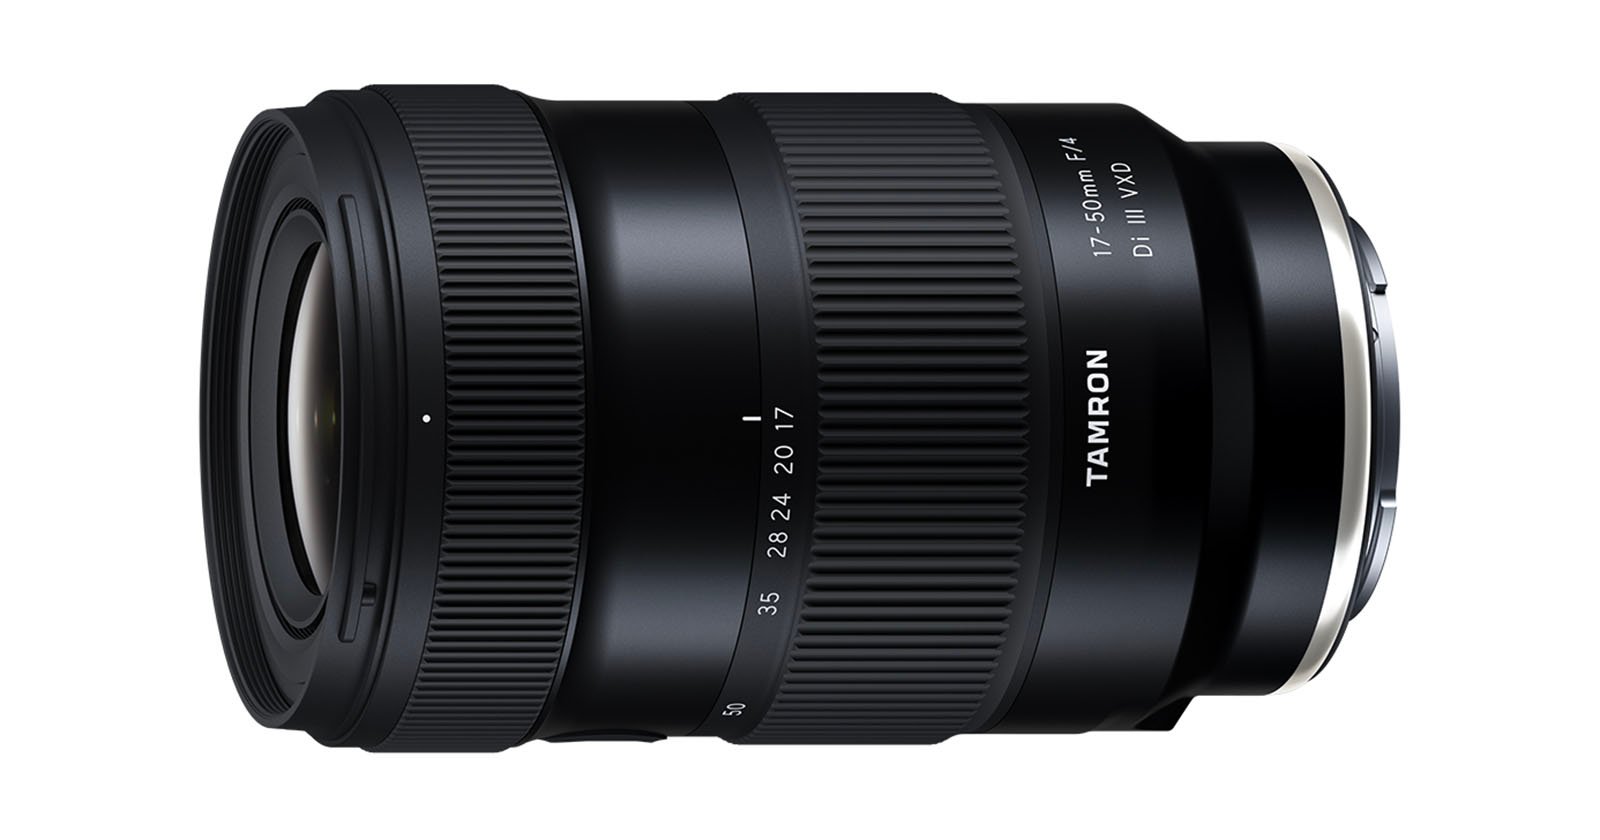 The Tamron 17-50mm f/4 Lens for Sony E-Mount is Coming Mid-October